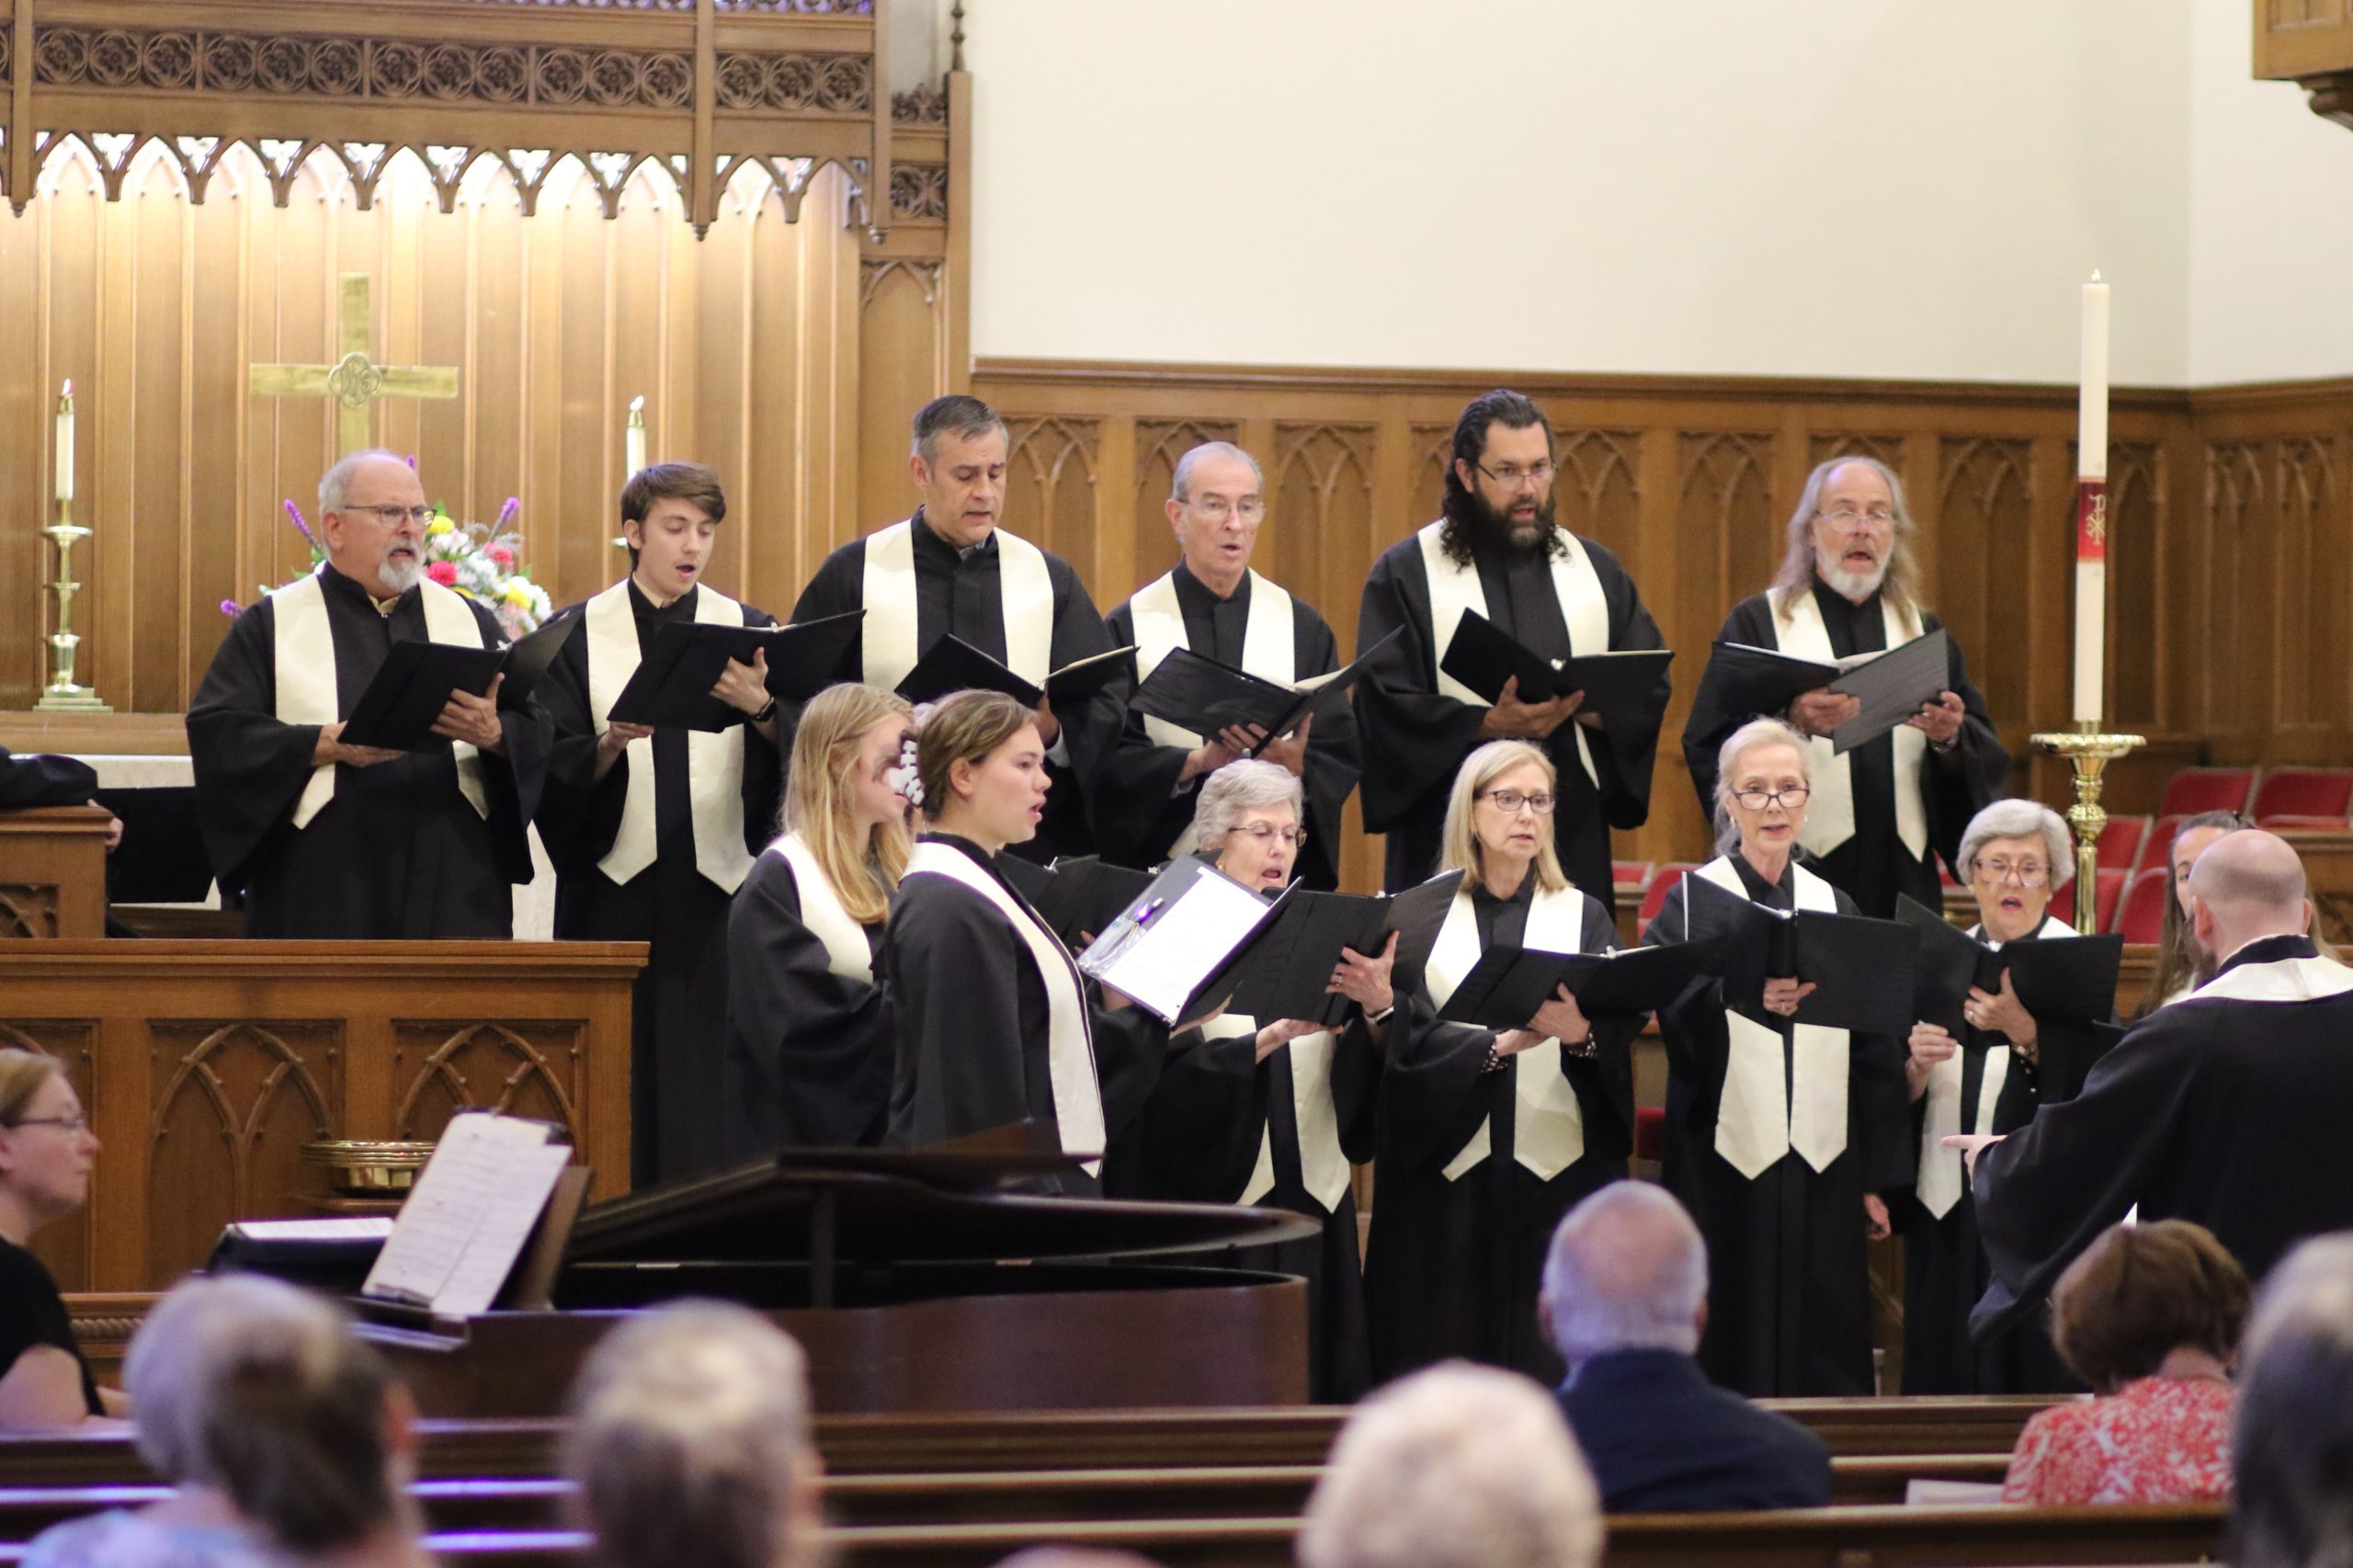 Festival of Choirs in the Sanctuary